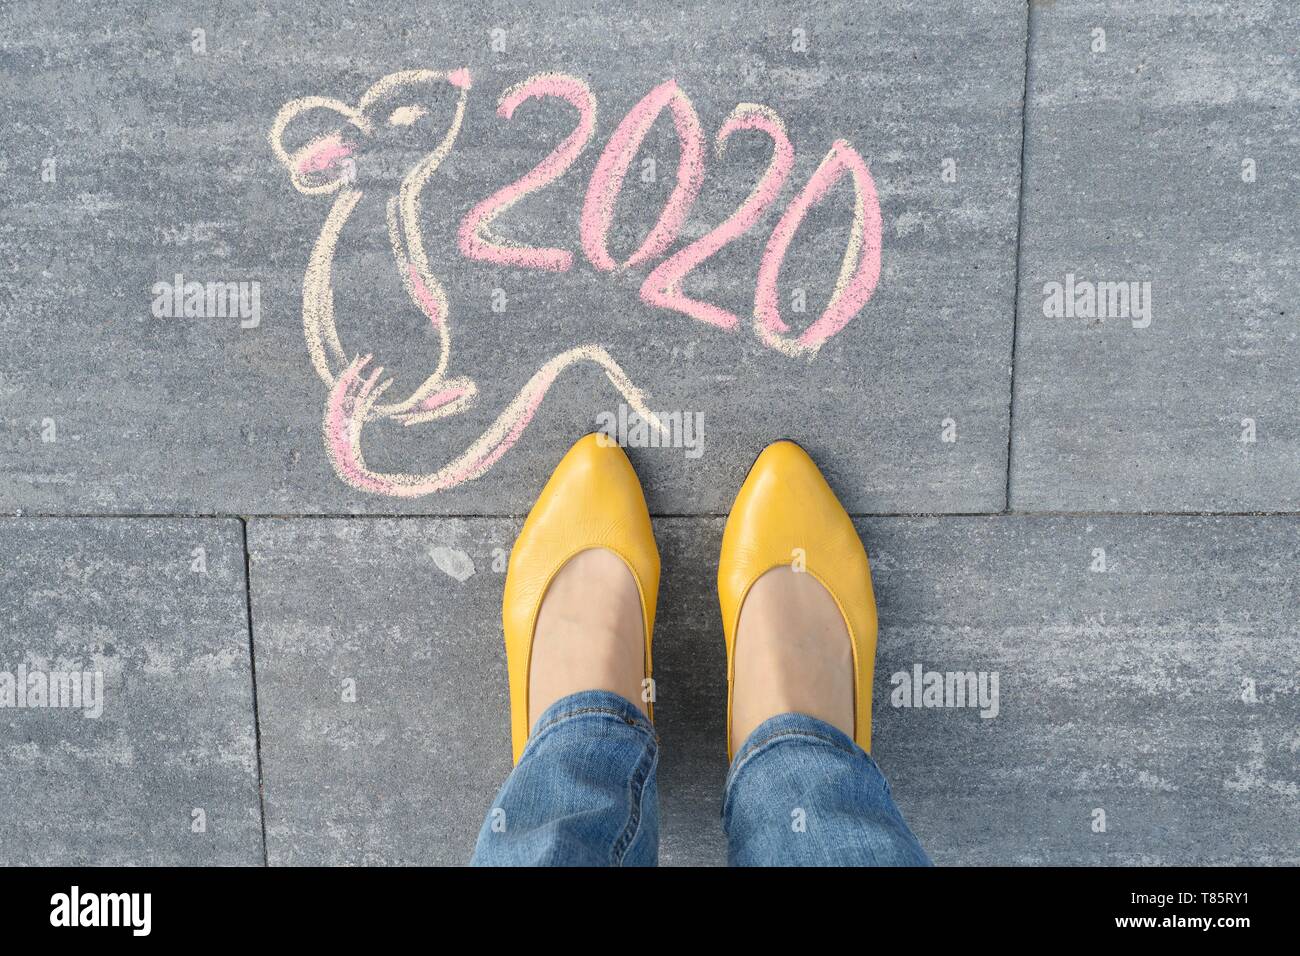 2020 new year of the rat. Top view on text and picture 2020 and pretty mouse, written on gray sidewalk with woman legs in feet in yellow shoes Stock Photo